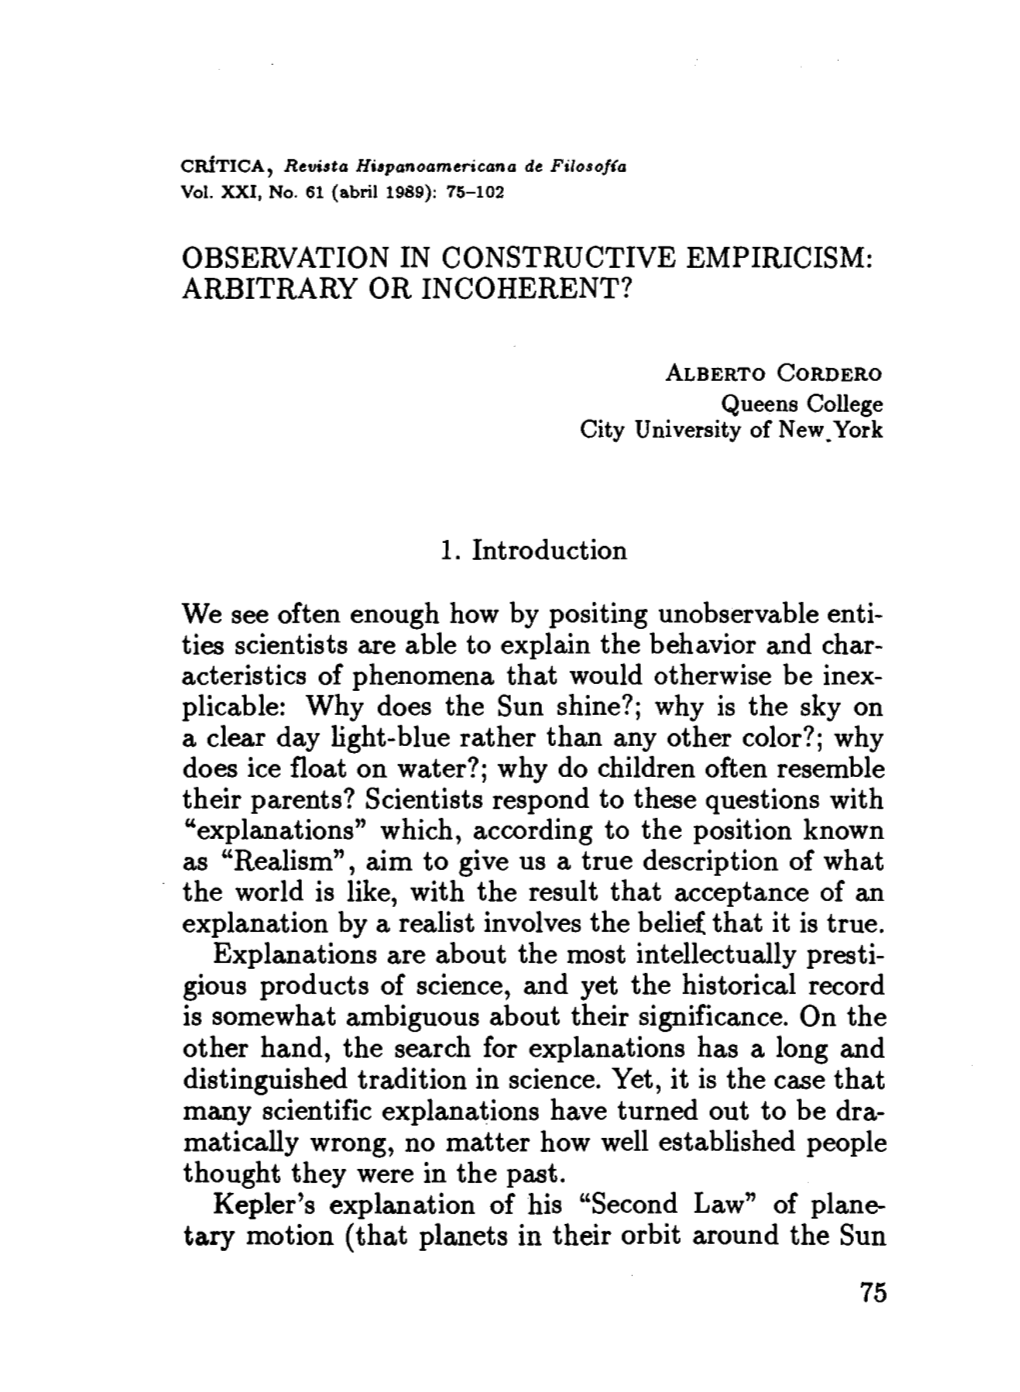 Observation in Constructive Empiricism: Arbitrary Or Incoherent?